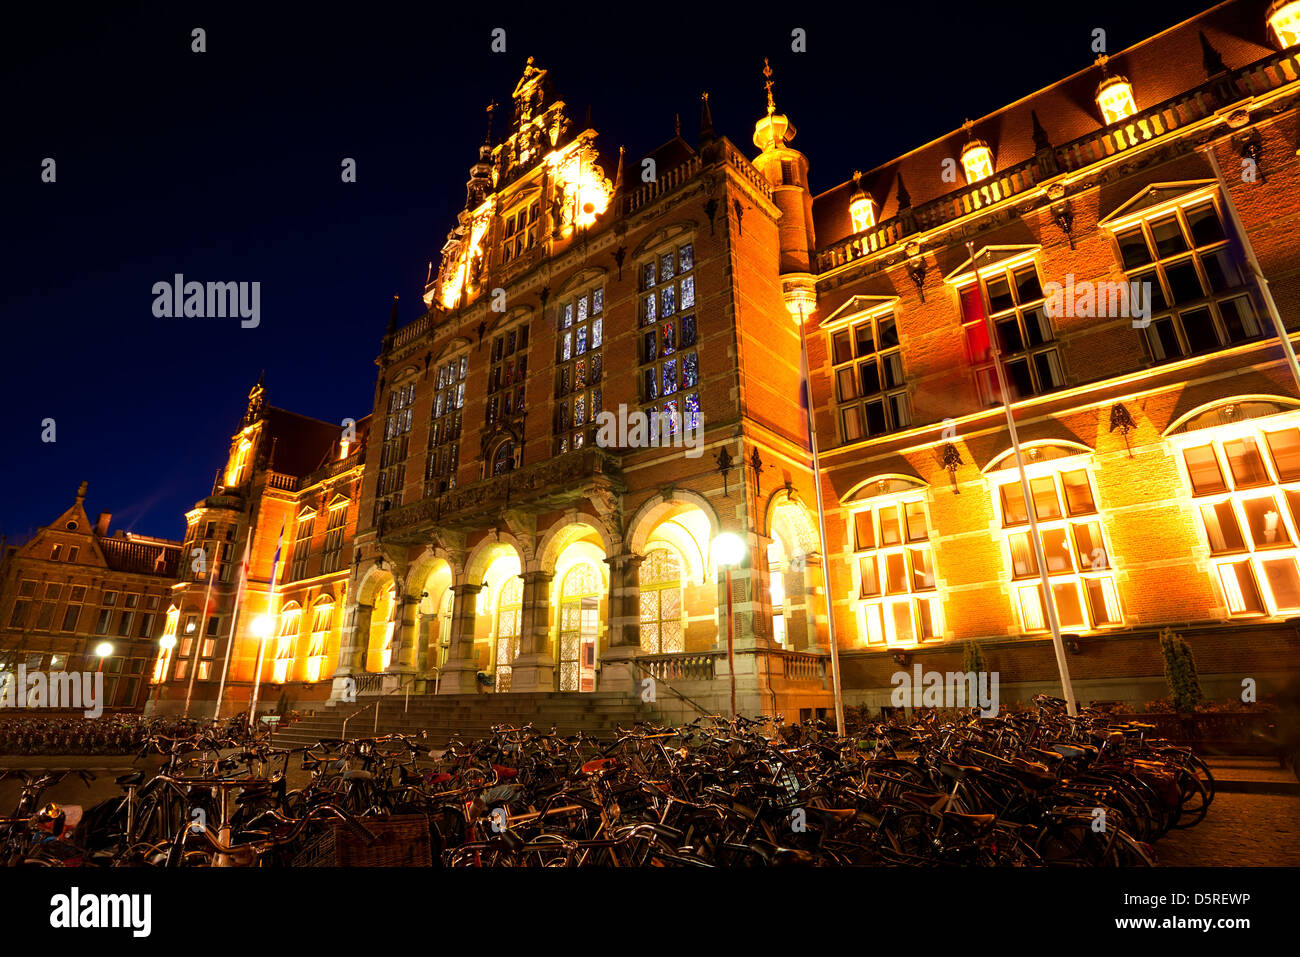 bicycles parking by University of Groningen at night, Netherlands Stock Photo